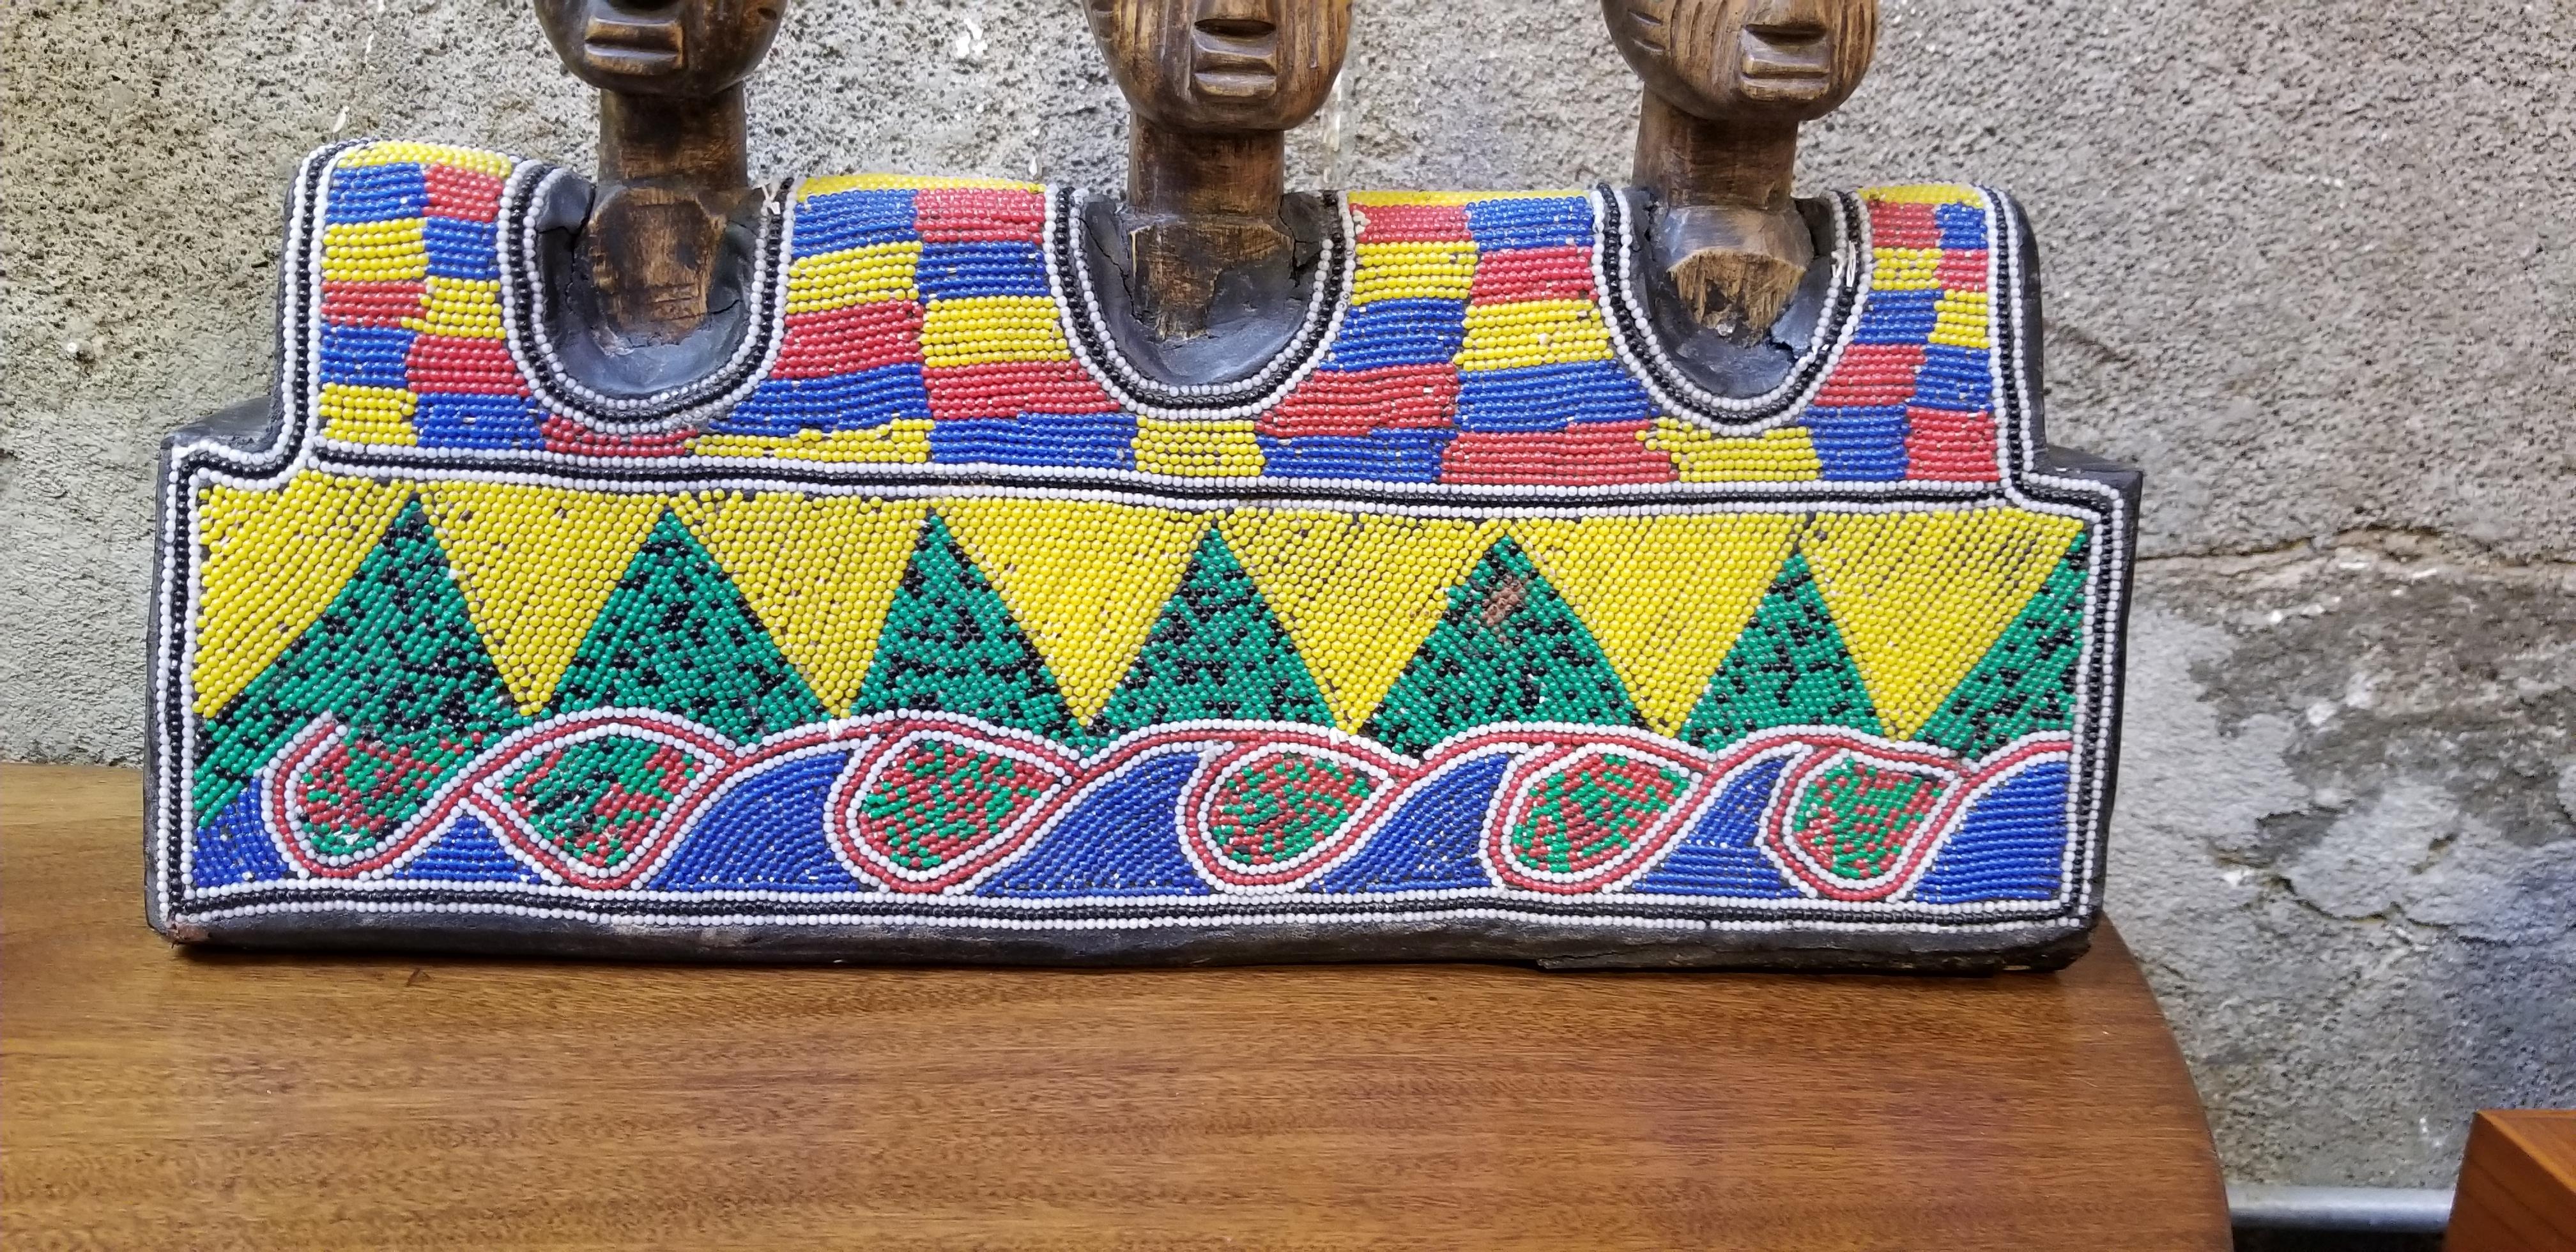 A vintage beaded African wood carving of 3 figures. Vibrant primary colors to bead work. Portions of wood are painted. Attributed to Yoruba, Nigeria, Africa. Mid-late 20th century.

Yoruba Art:
The Yoruba of West Africa (Benin, Nigeria and Togo,